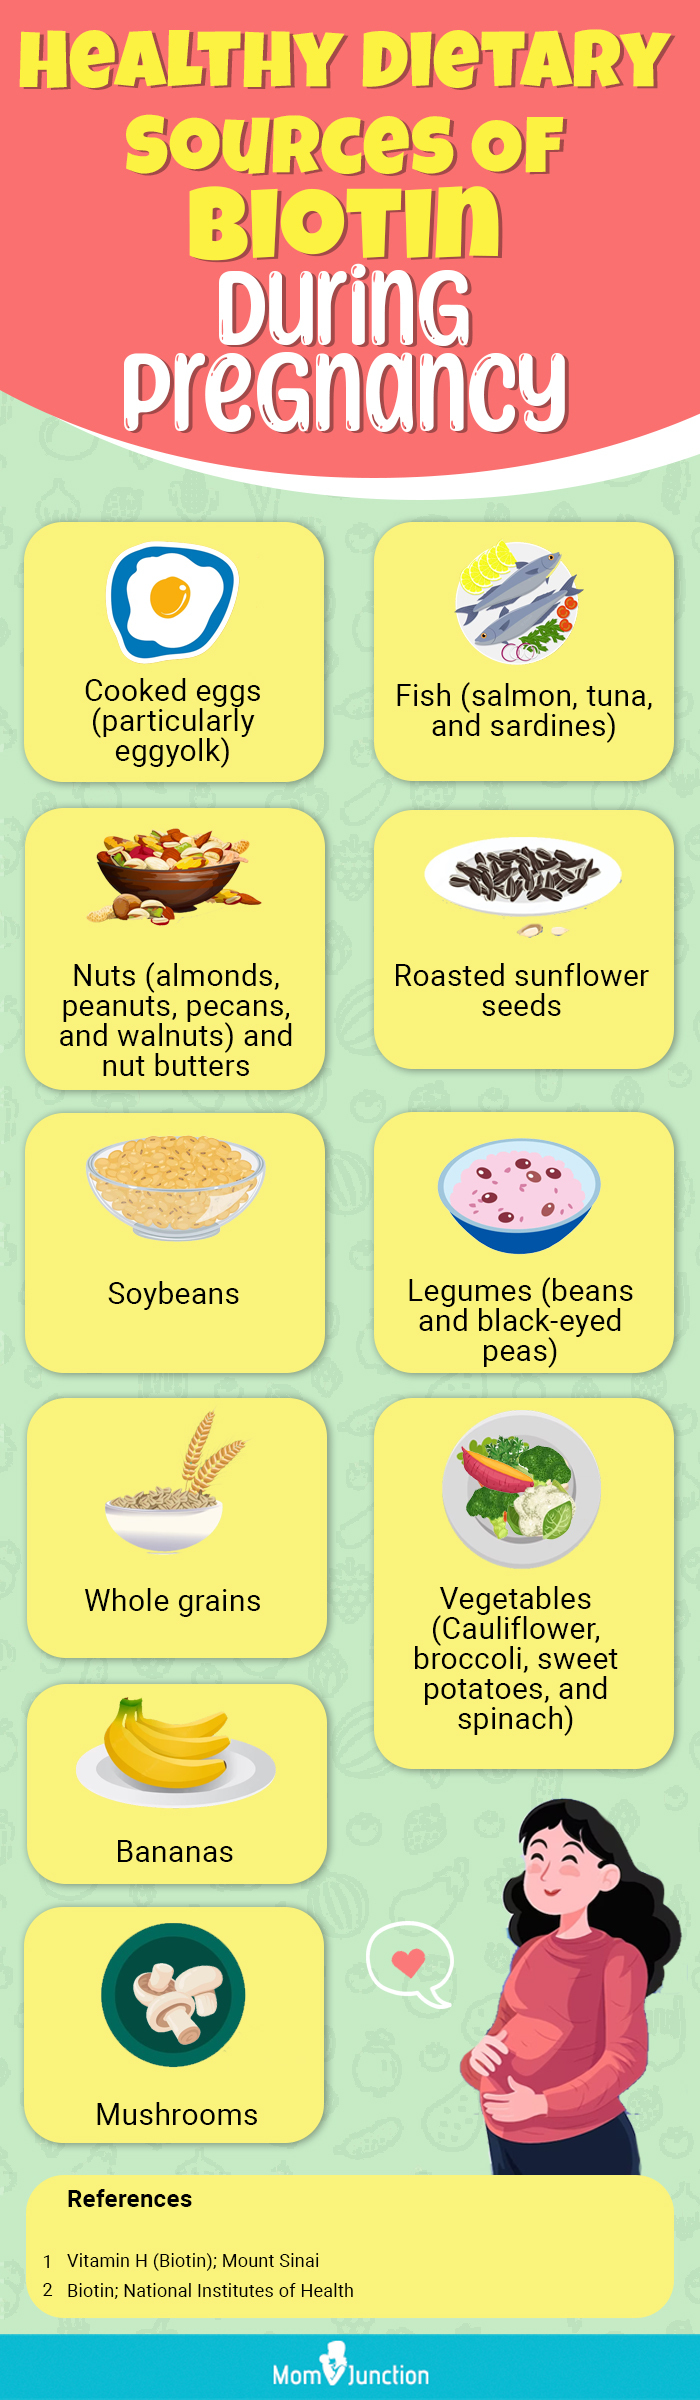 healthy dietary sources of biotin during pregnancy (infographic)